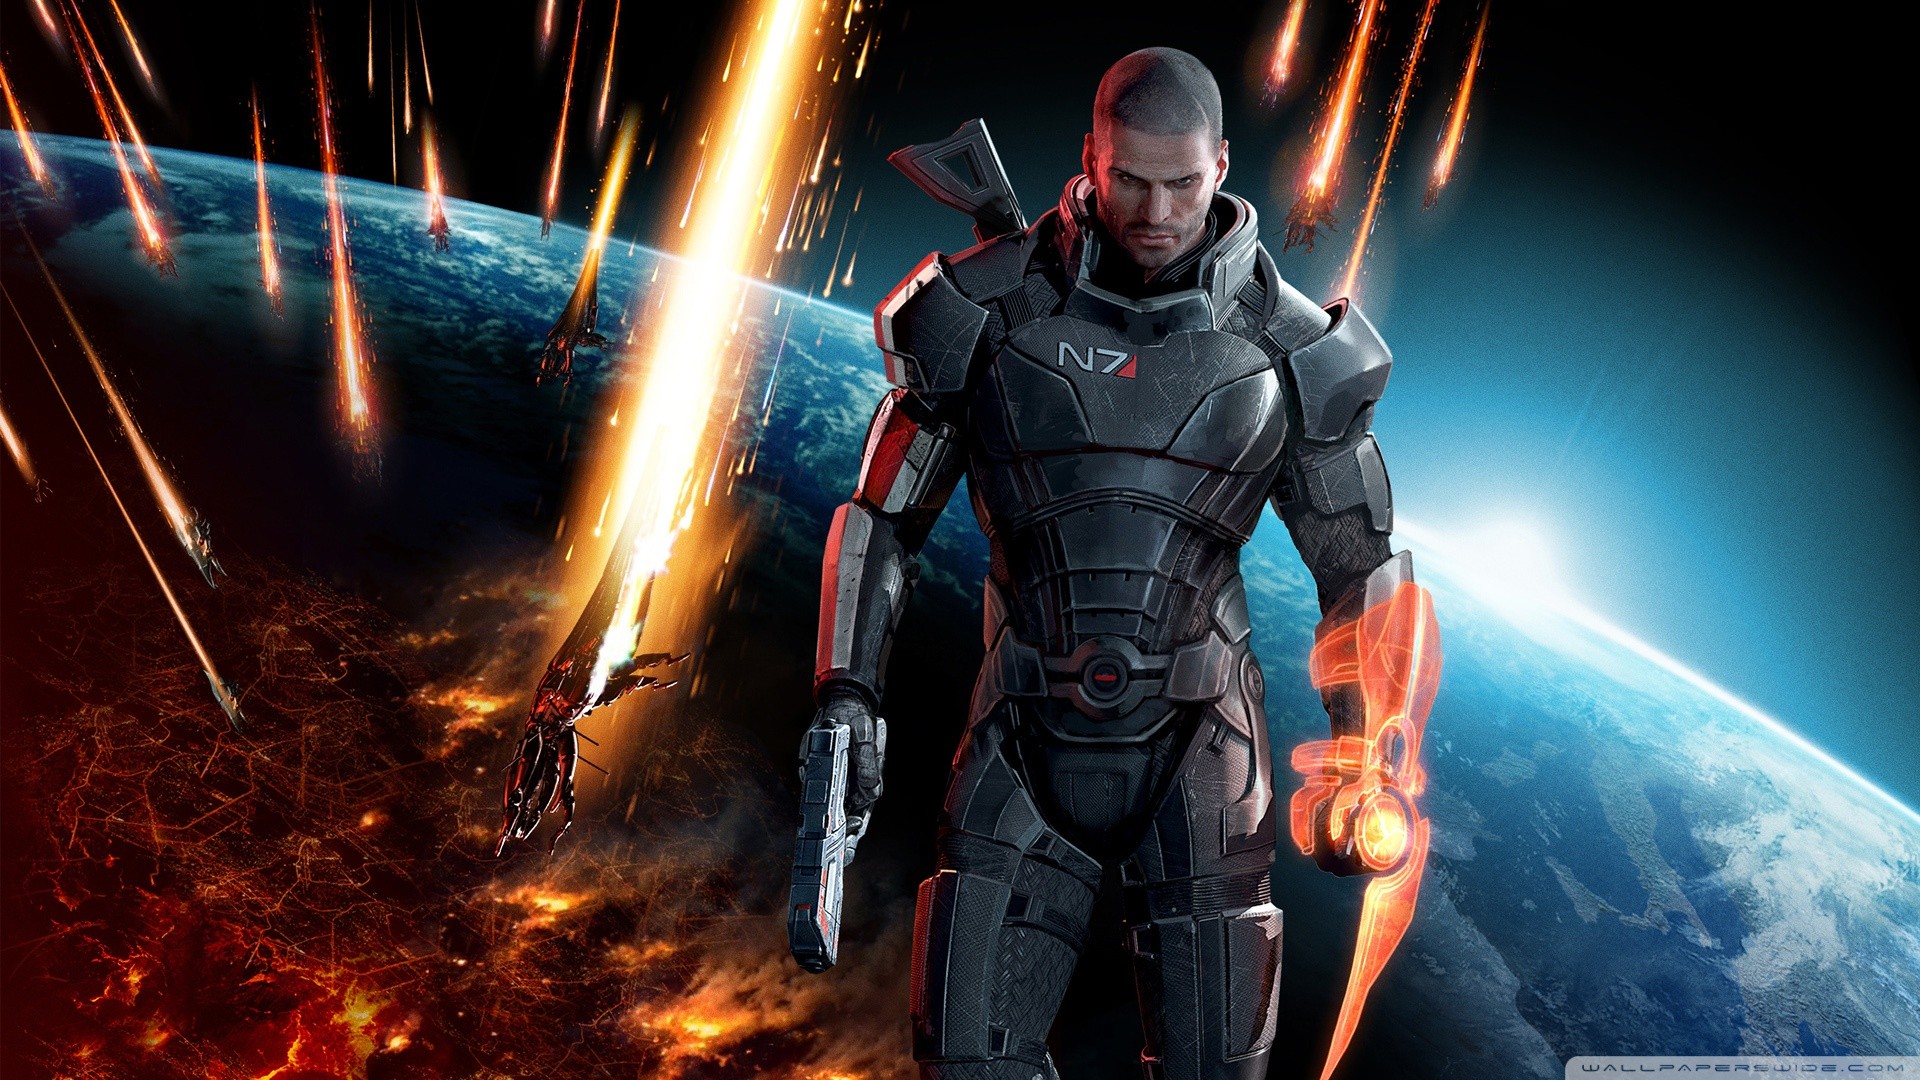 General 1920x1080 video games Mass Effect 3 PC gaming video game men science fiction Science Fiction Men video game characters video game art futuristic armor weapon